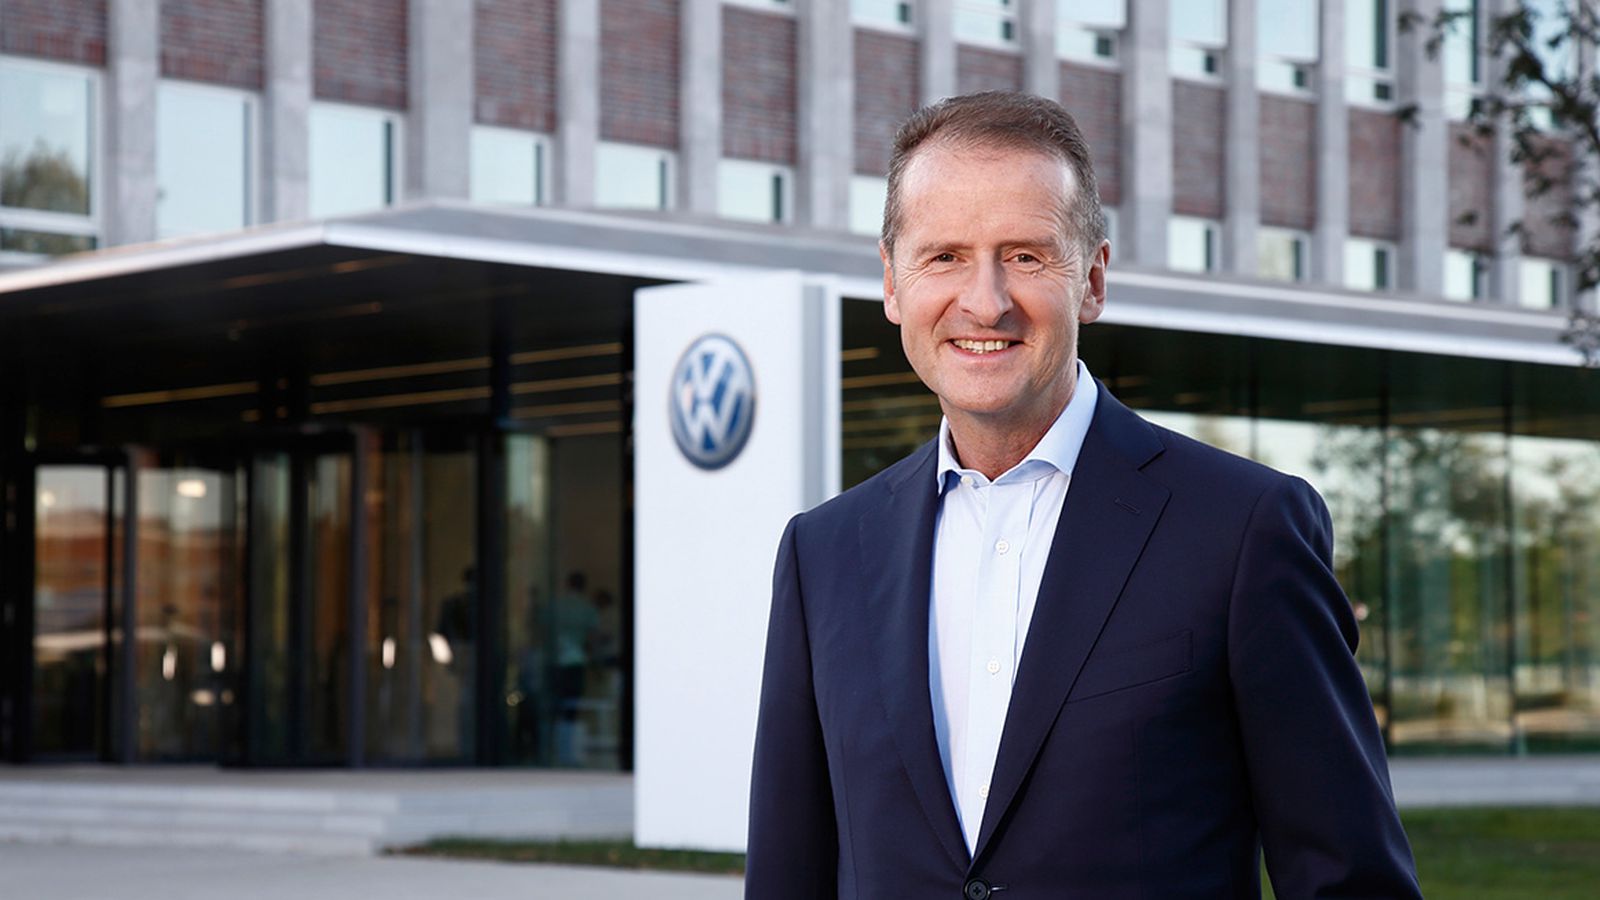 Volkswagen CEO: “We are not afraid” of a potential “Apple Car”